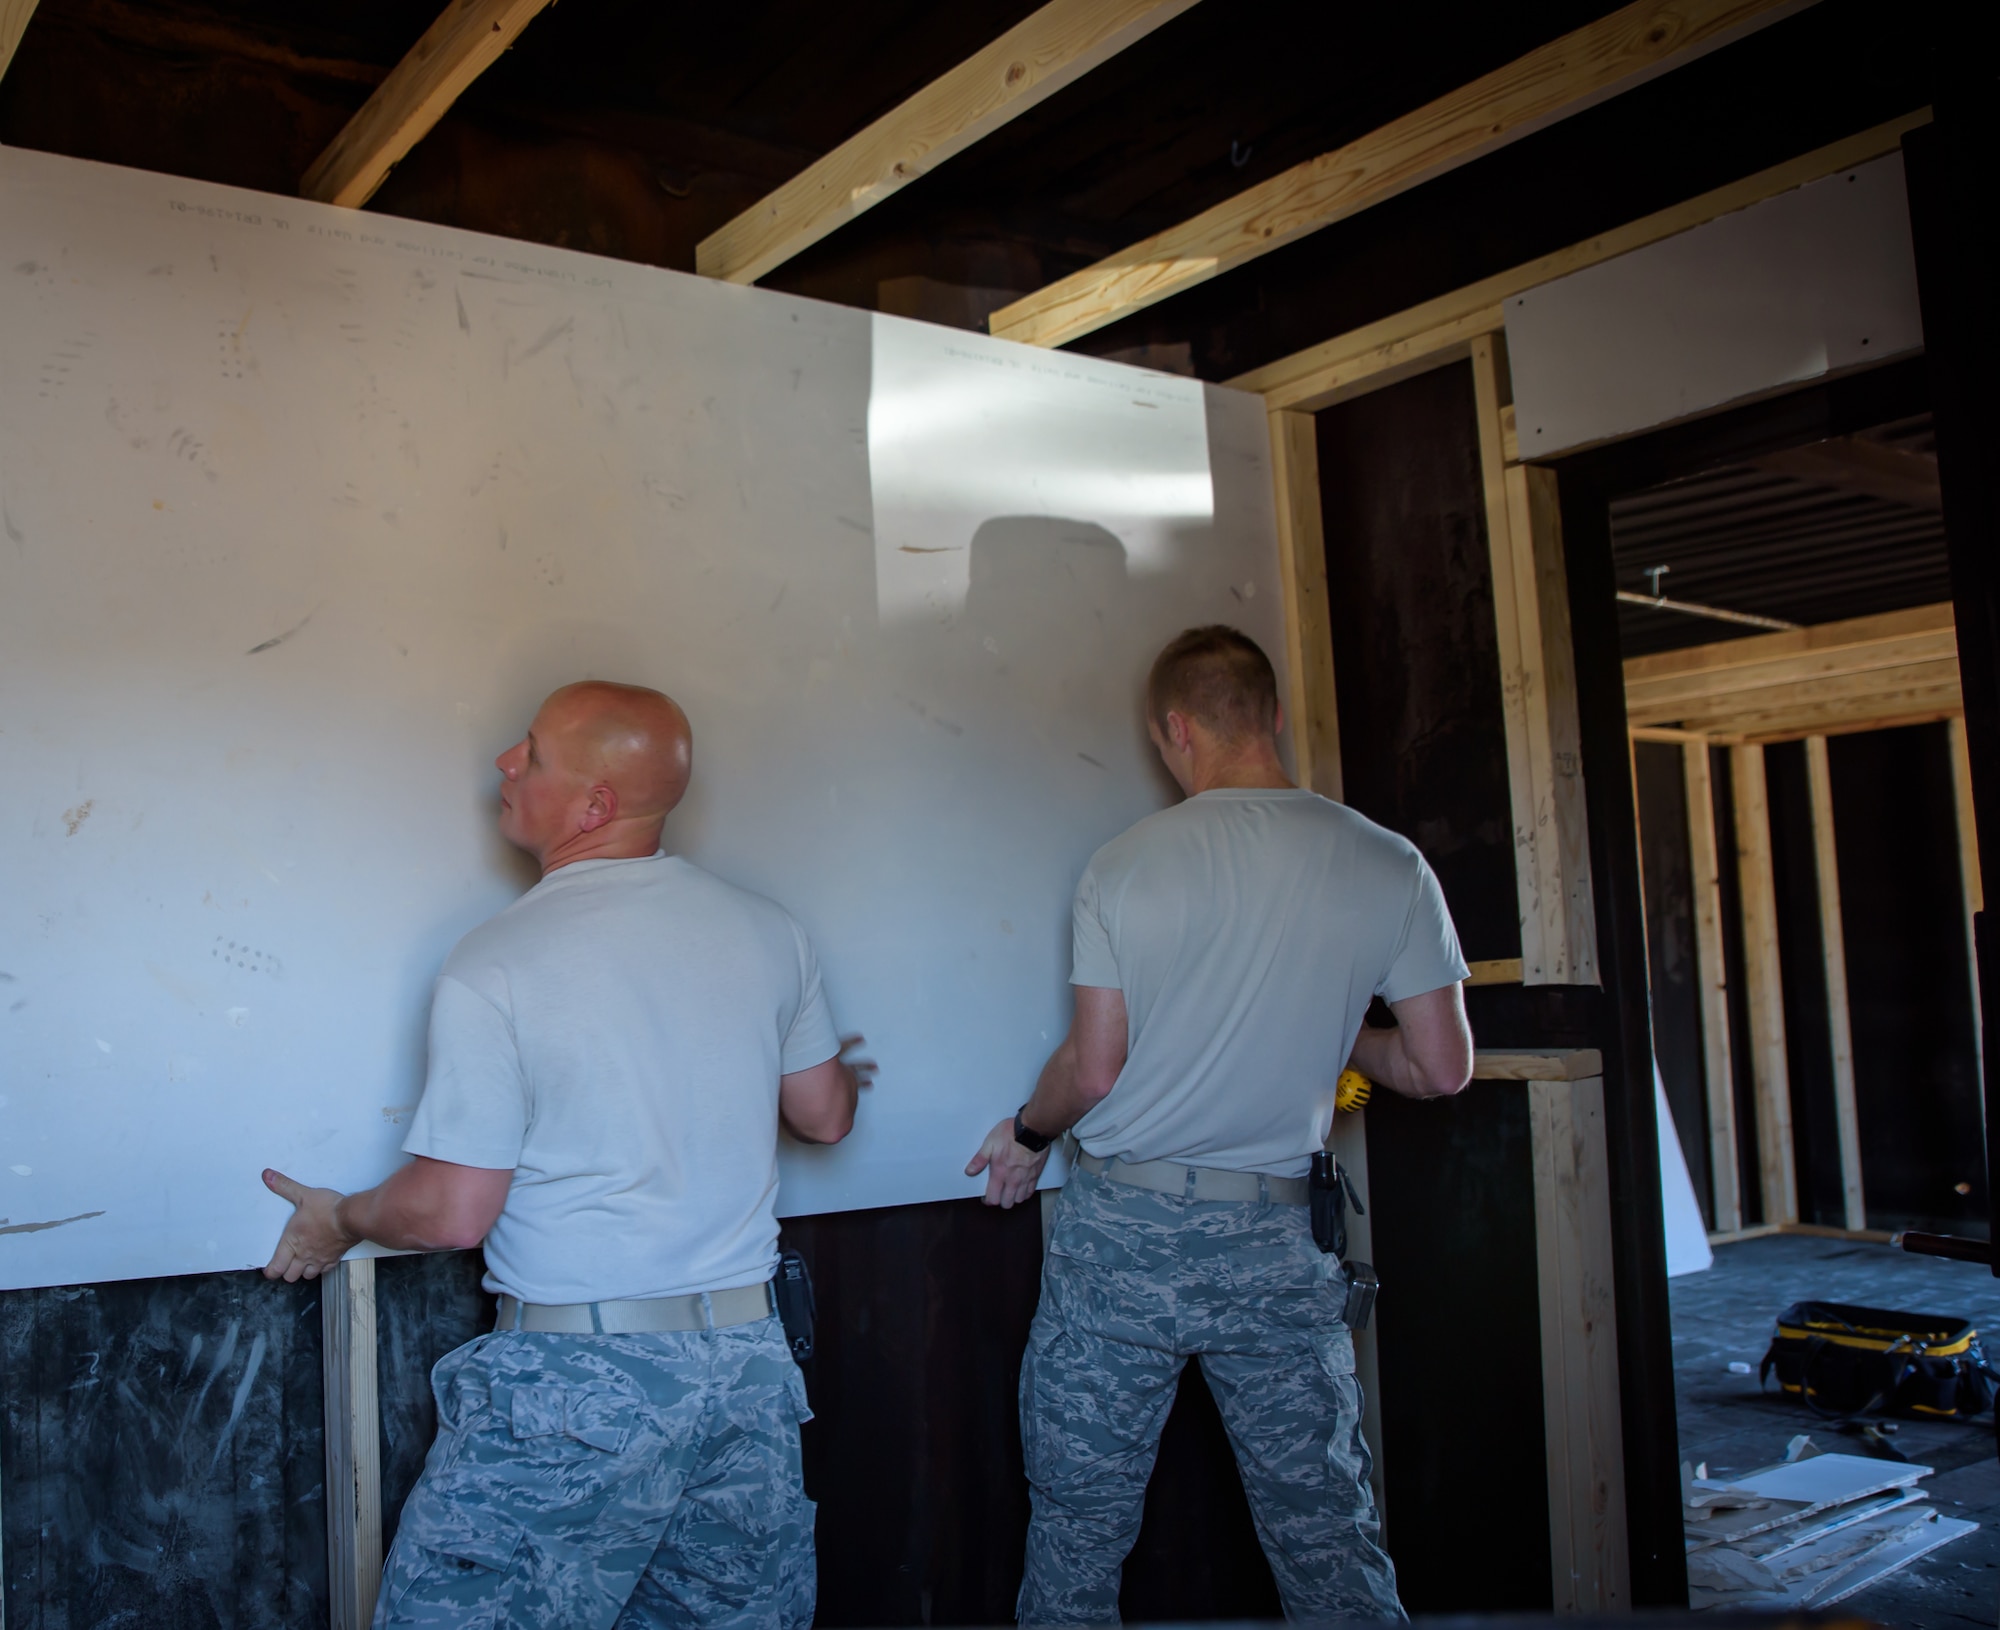 U.S. Air Force Airmen assigned to the 153rd Civil Engineer Squadron assist  Laramie County Fire District #2 with preparing their fire training structure for the upcoming Honoring Tradition, Leading Change Conference, May 6, 2017 in Cheyenne, Wyoming. The engineers were asked to install walls to create various rooms and add a fire suppression system within the district’s training structure. The project provided the water and fuels systems maintenance flight and the structural flight Airmen a chance to maintain their proficiency while helping the community. (U.S. Air National Guard photo by Tech. Sgt. John Galvin/Released)